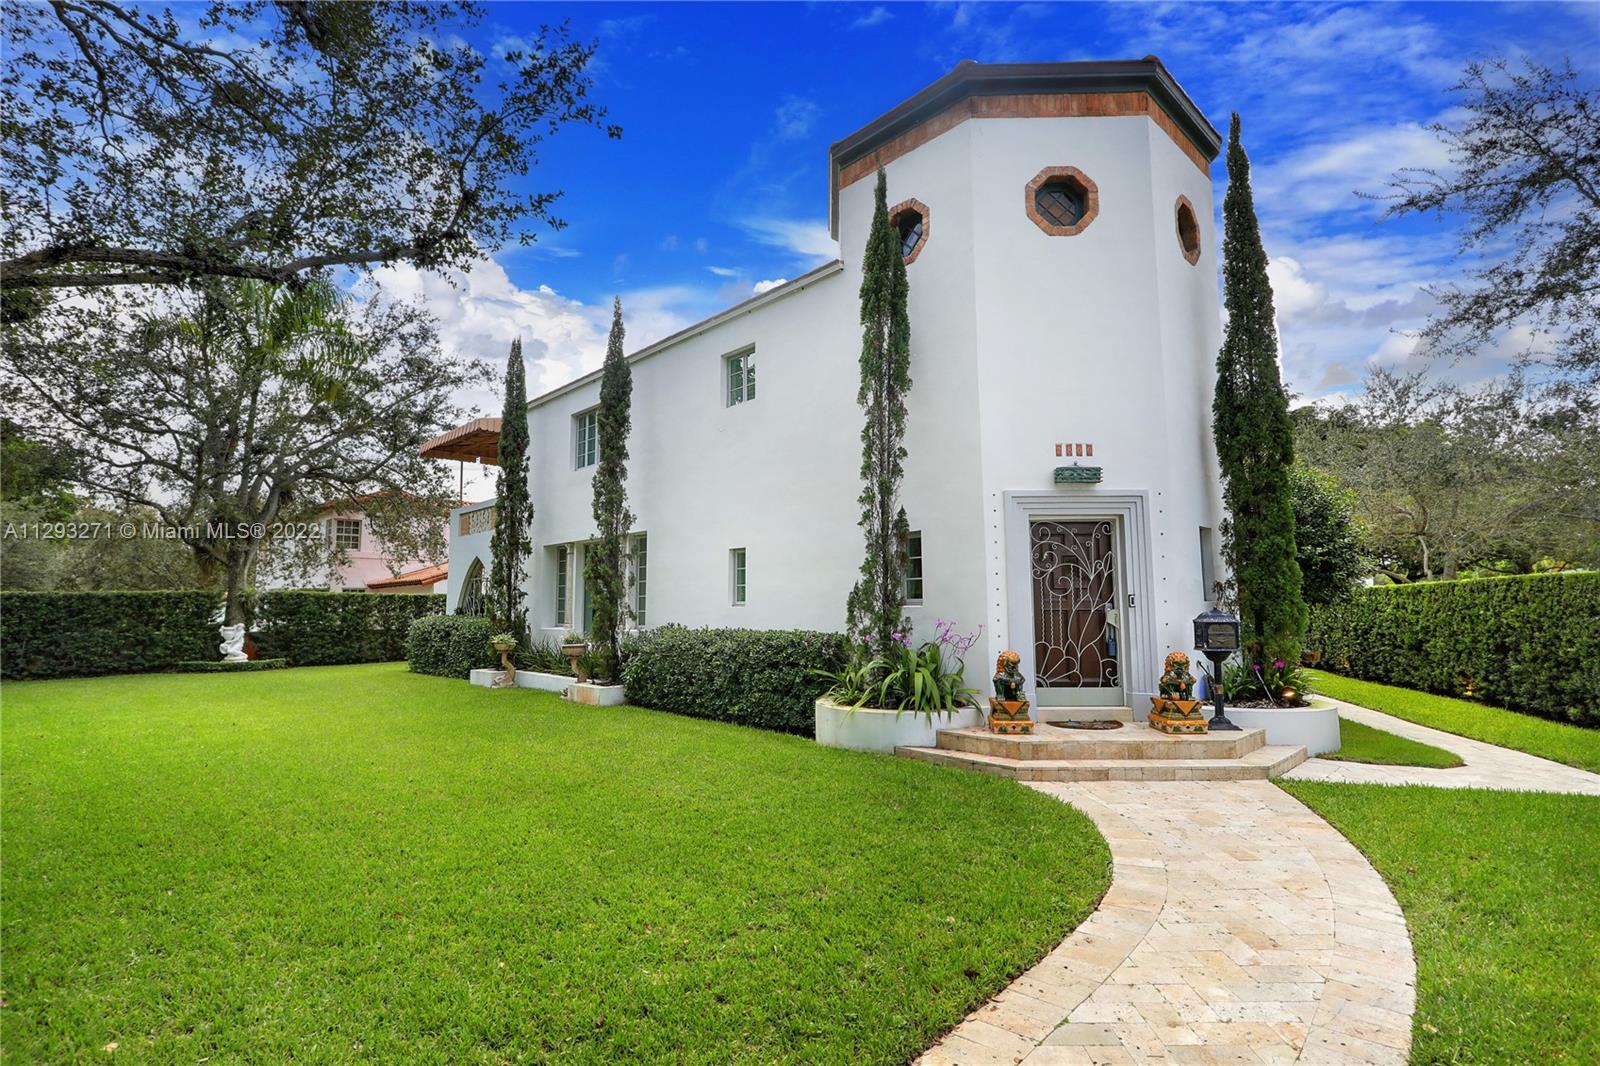 Overlooking the DeSoto Fountain, this iconic 4 BR/4.5 BA 1937 Art Deco showstopper marries classic architecture w/ modern upgrades.  The 2-story foyer entry has a sweeping staircase w/ original terrazzo & tile & sets the stage for this architectural gem.  To the left, find the large living rm w/ fireplace, windows/doors on 3 sides, & access to the covered porch w/ gorgeous ironwork. The spacious dining room sits adjacent to the fully-updated kitchen that has beautiful tile, center island, gas range, & double ovens.  The primary suite is upstairs & enjoys a private balcony, walk-in closet, & en-suite BA.  2 more BR’s w/ en-suite BA’s are also upstairs.   The 11,500 SF lot has room, & approved plans, for a pool & there are plans to expand the 2nd story.  Impact glass, generator, 2 car gar.